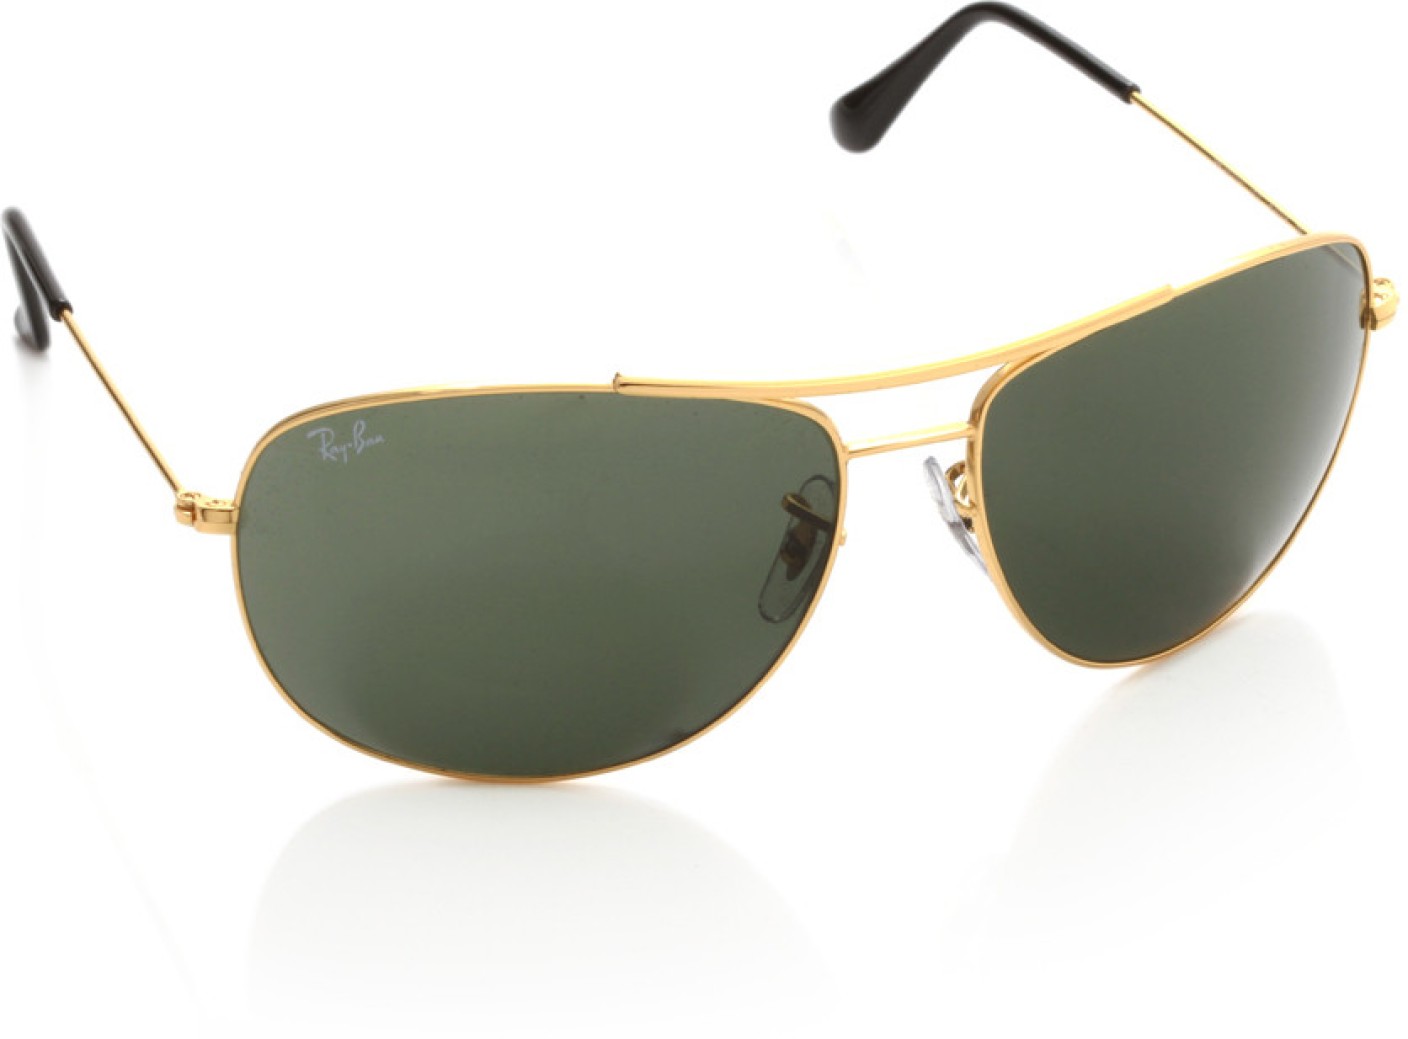 Ray Ban P Glasses Prices In India | Gallo